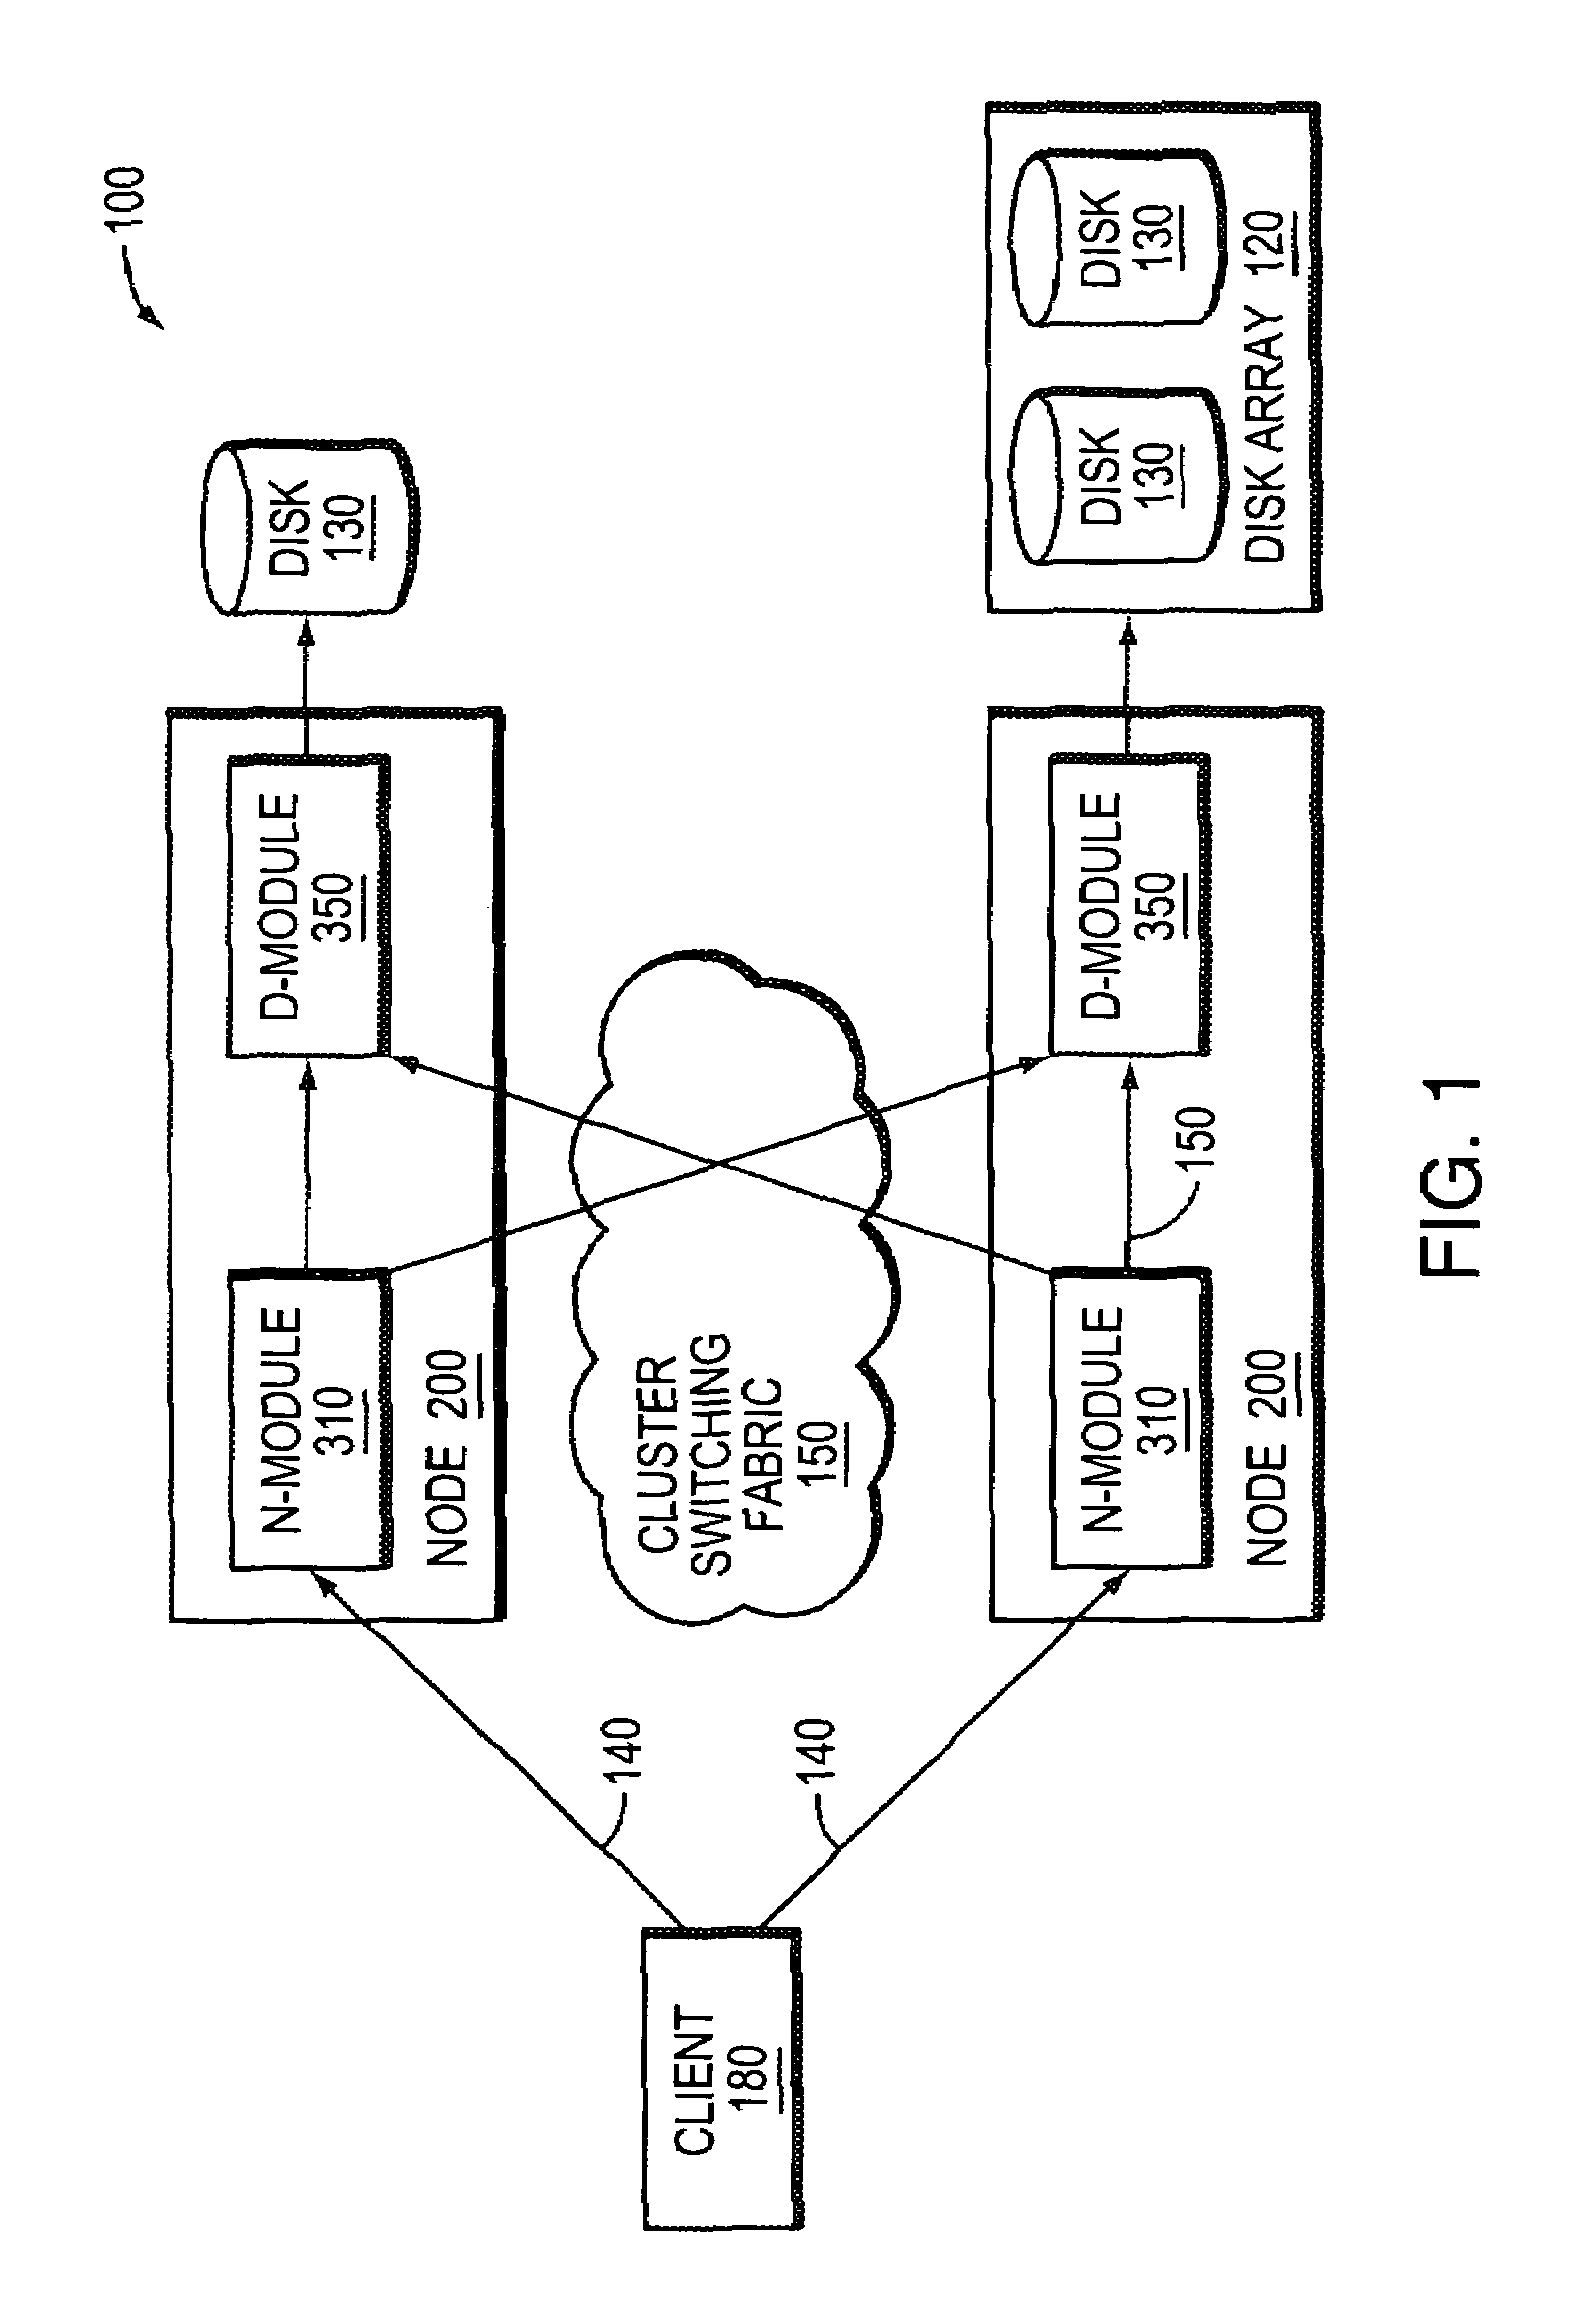 System and method for managing hard and soft lock state information in a distributed storage system environment